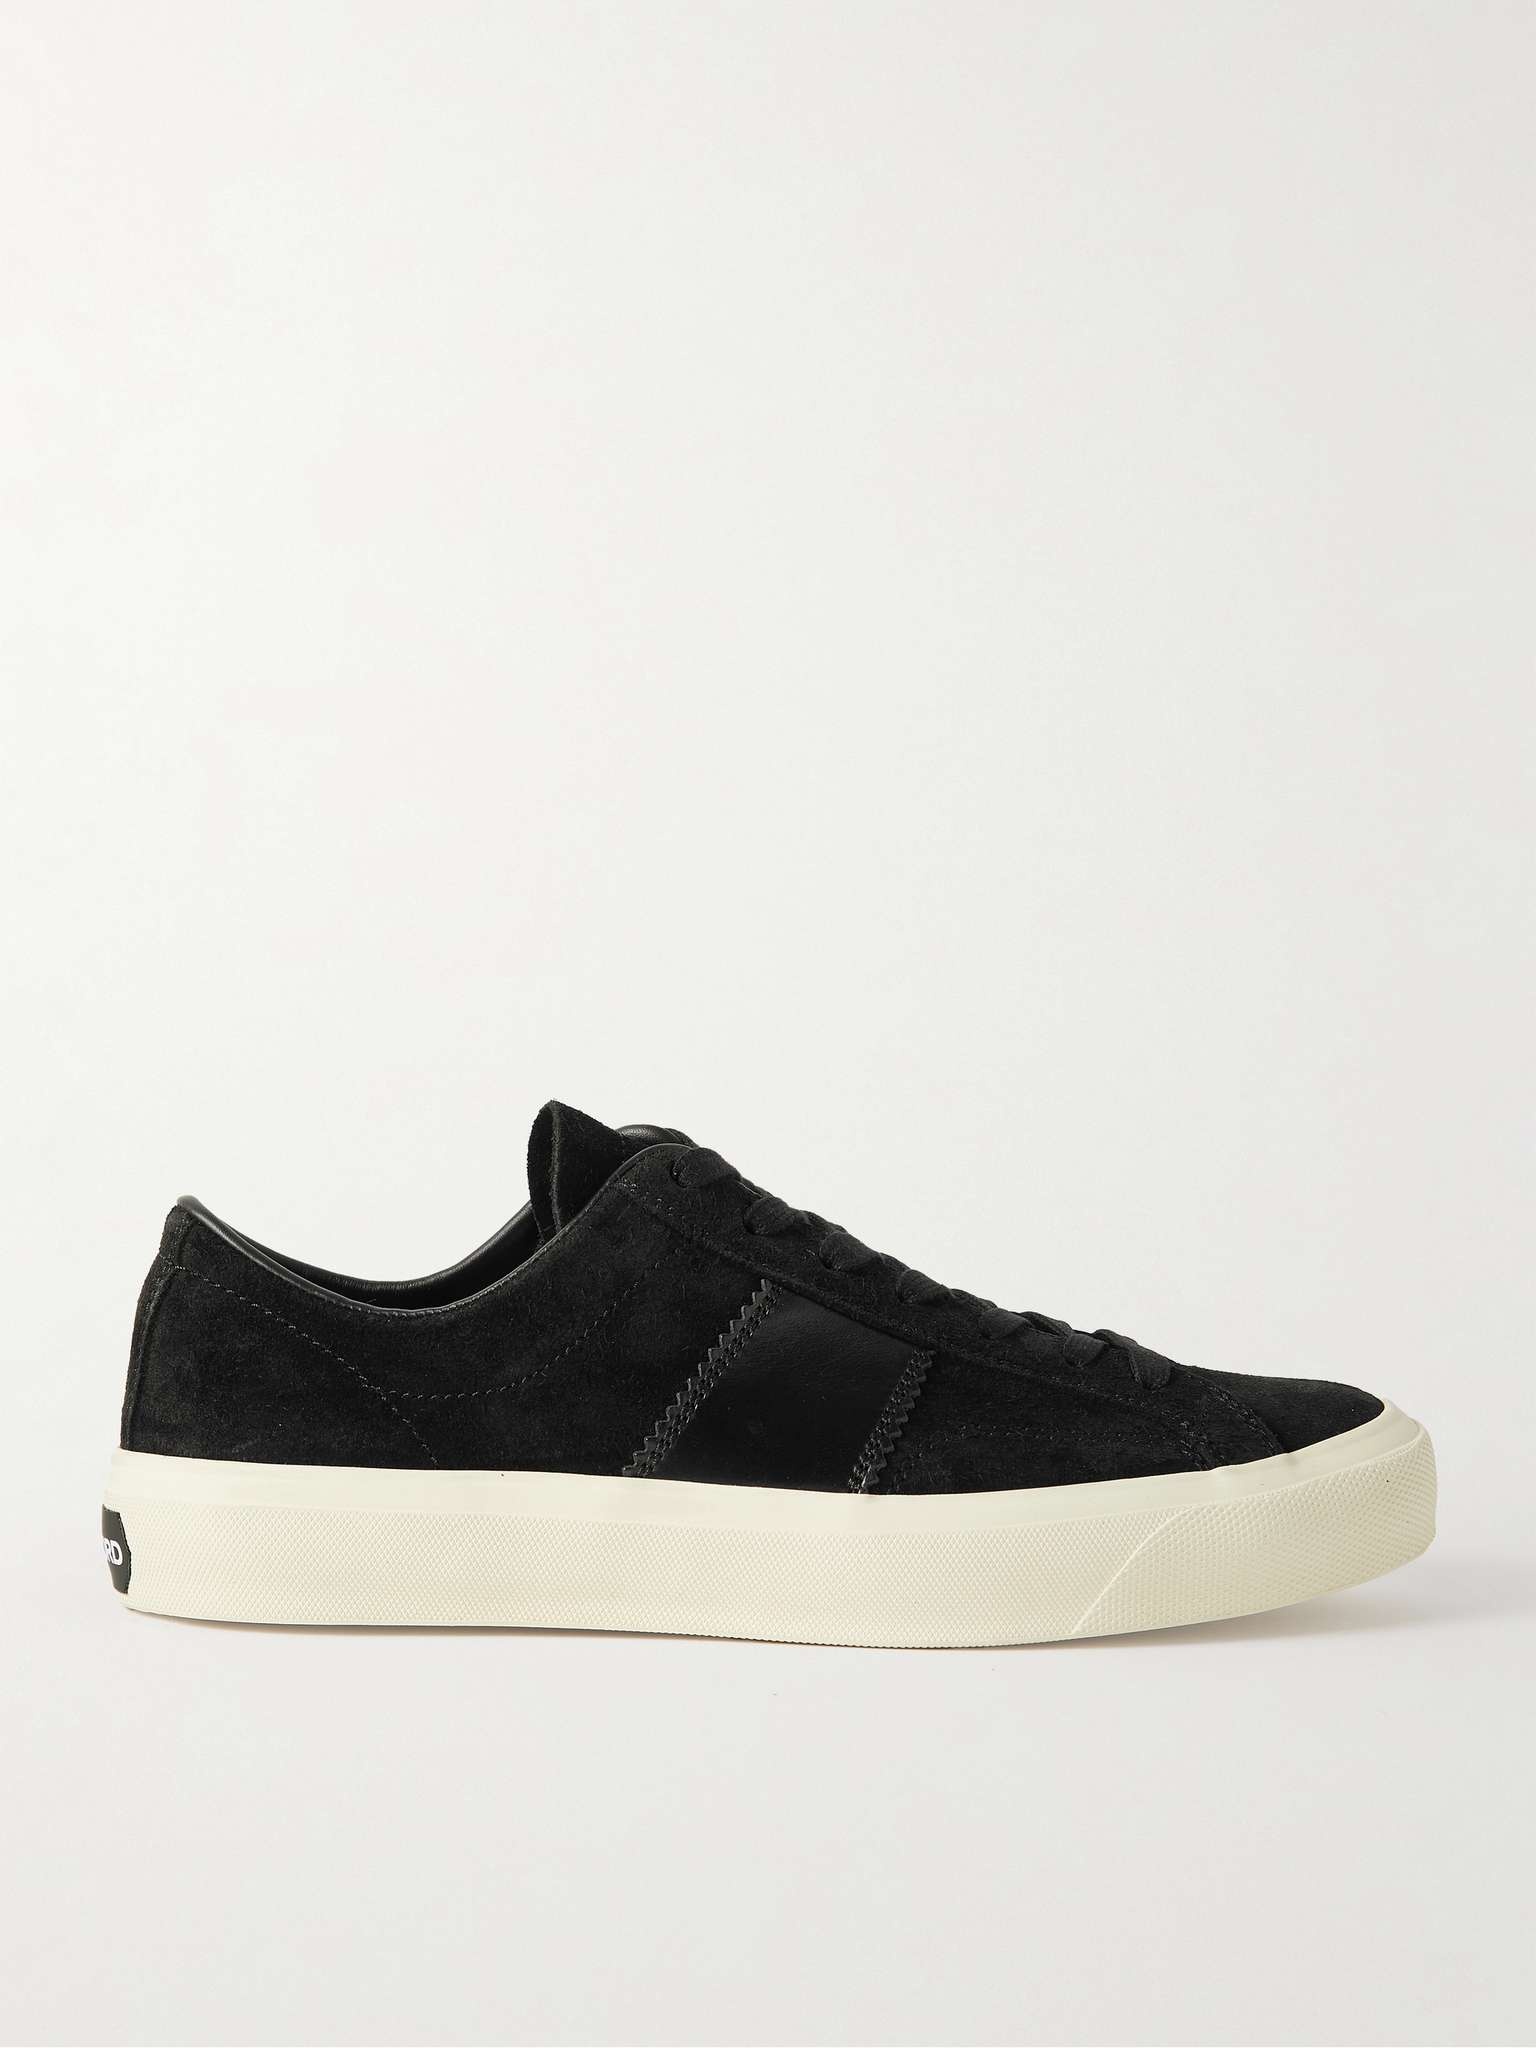 Cambridge Leather-Trimmed Suede Sneakers - 1